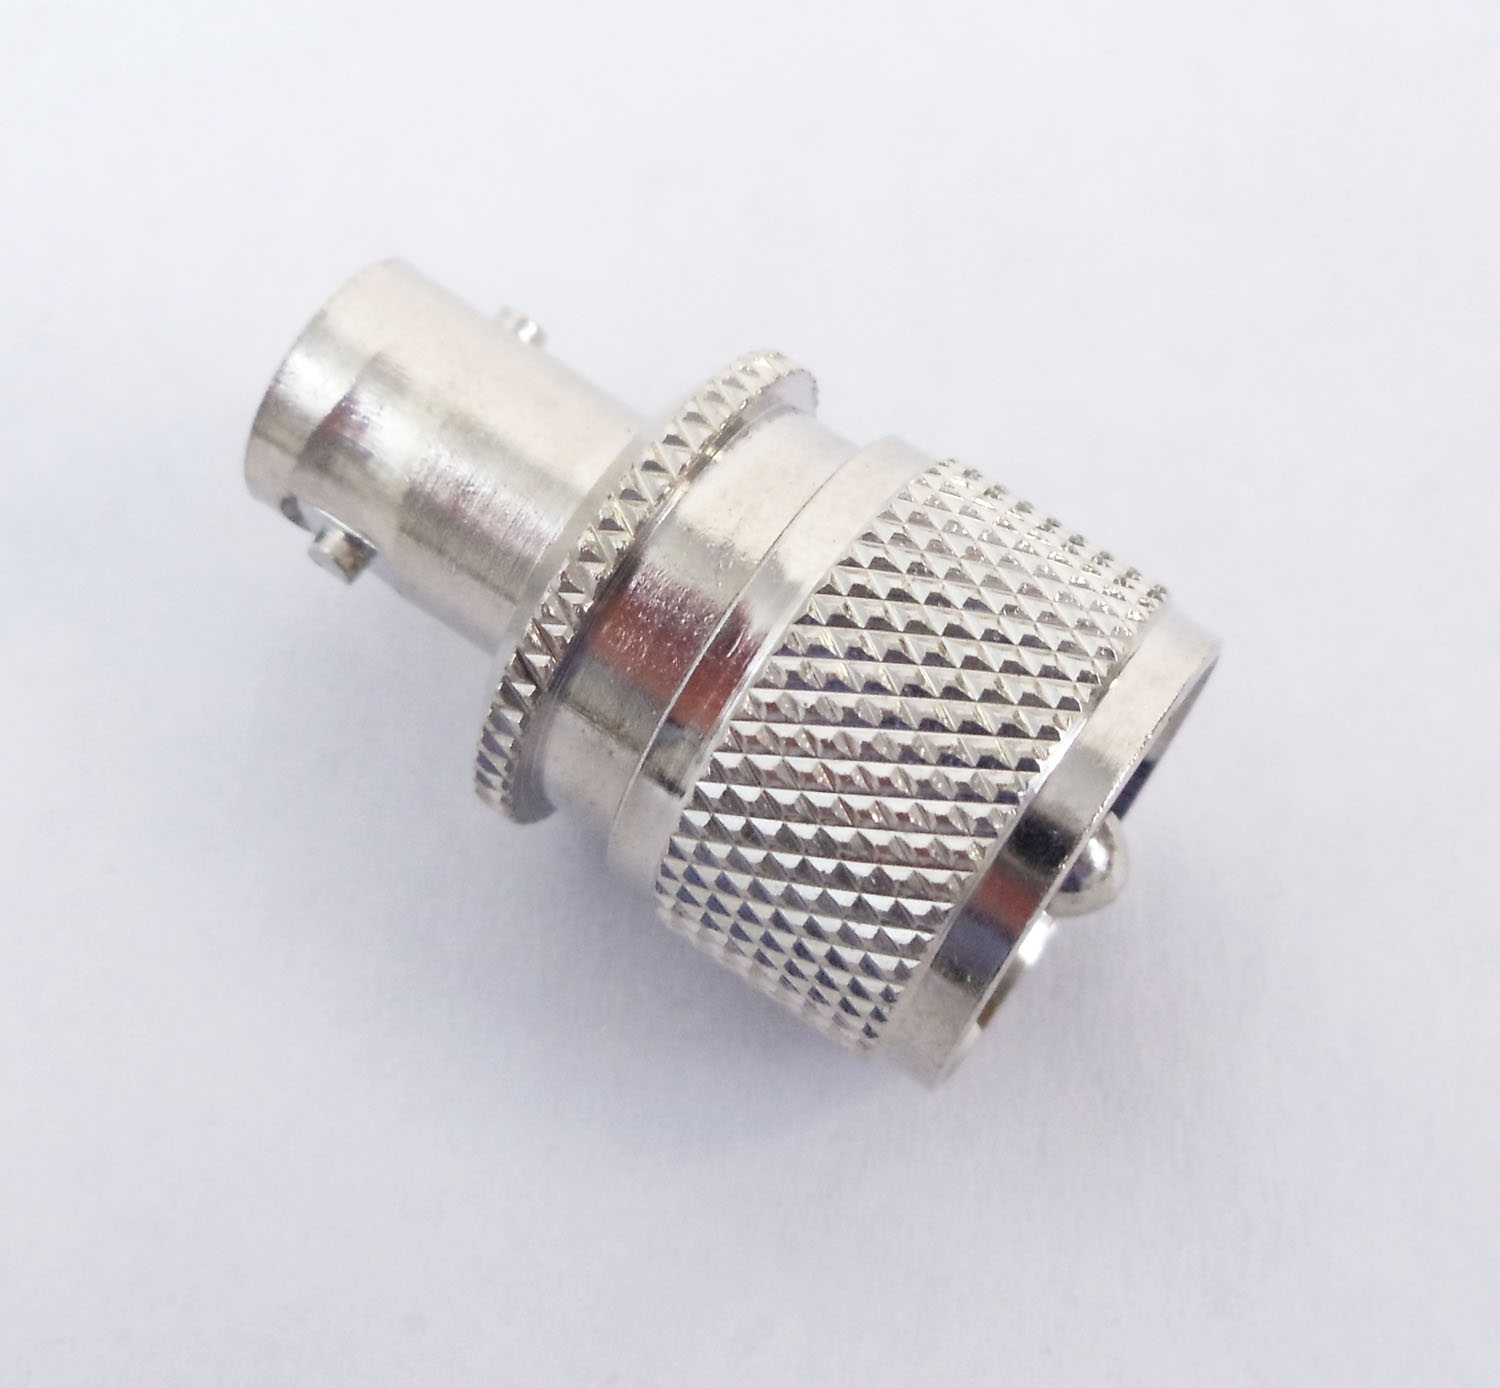 Bnc Female To Uhf Male Adapter (Vad4X)